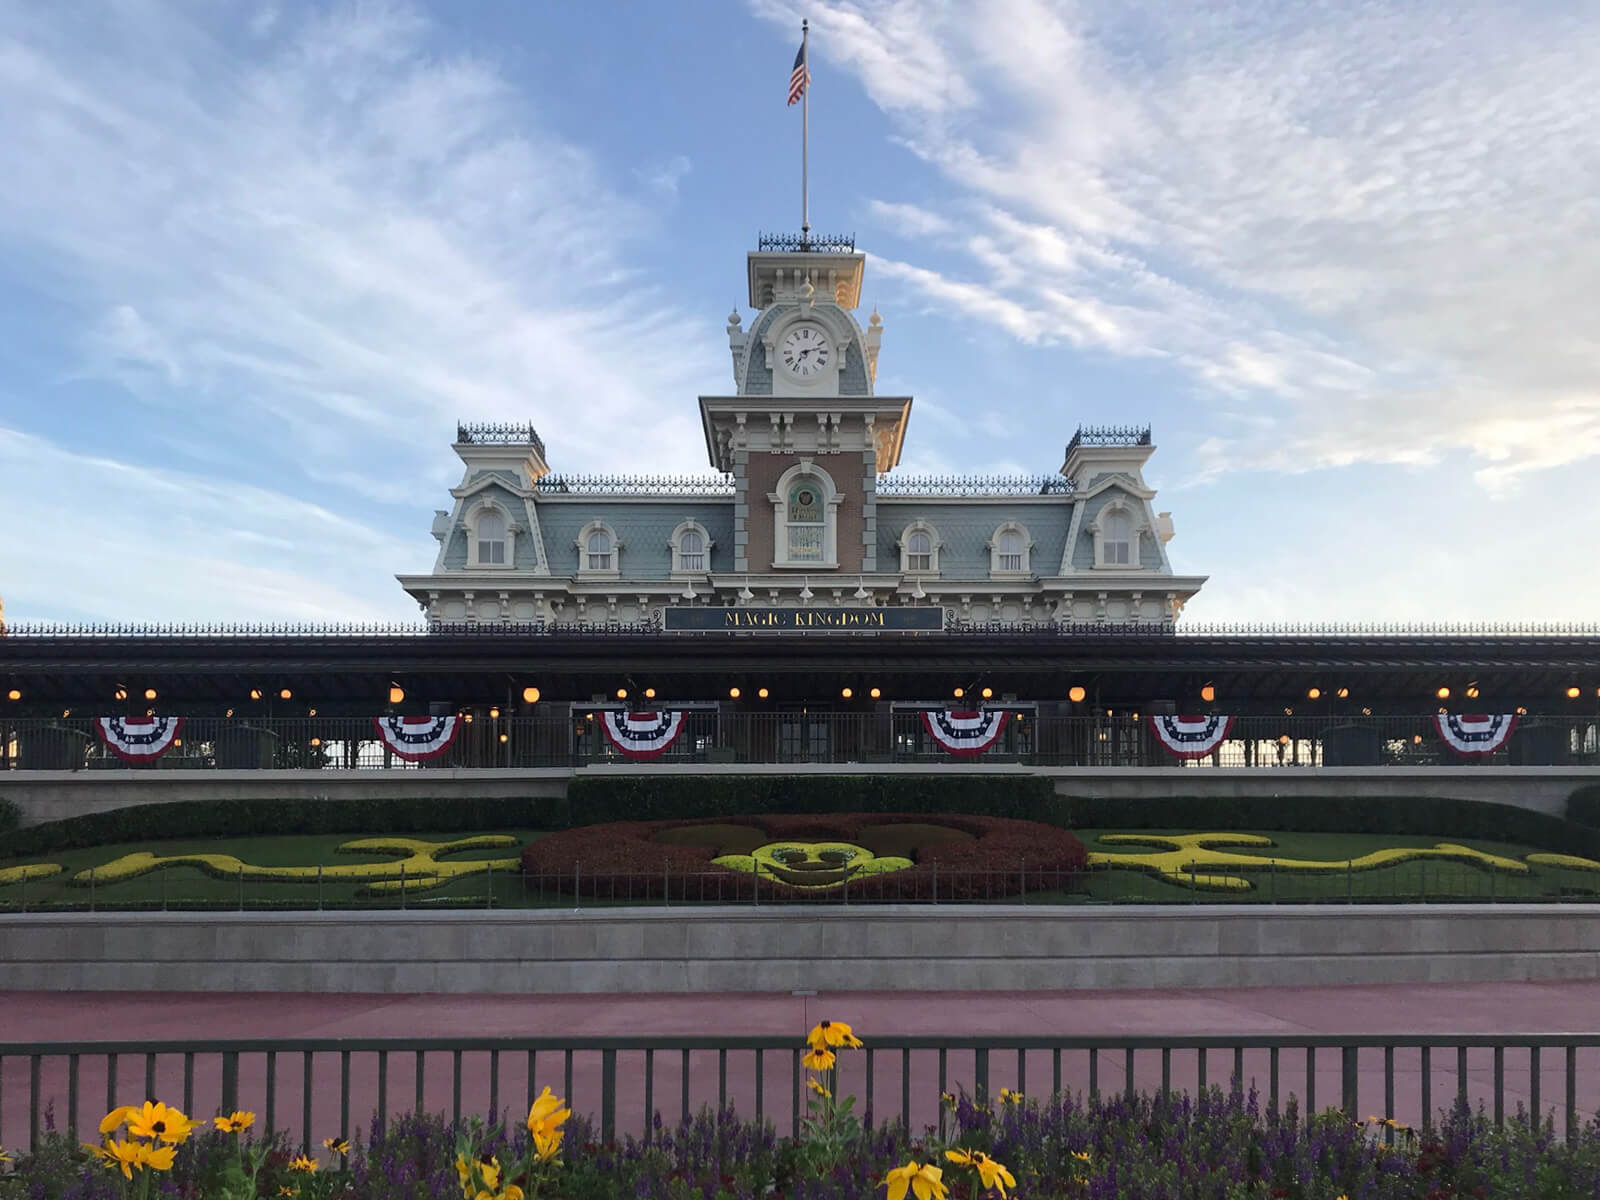 The entrance to Disney Worldâ€™s Magic Kingdom. In the foreground is a garden with a hedge shaped like Mickey Mouse. In the background is a train station with the flag of the United States of America standing from a pole